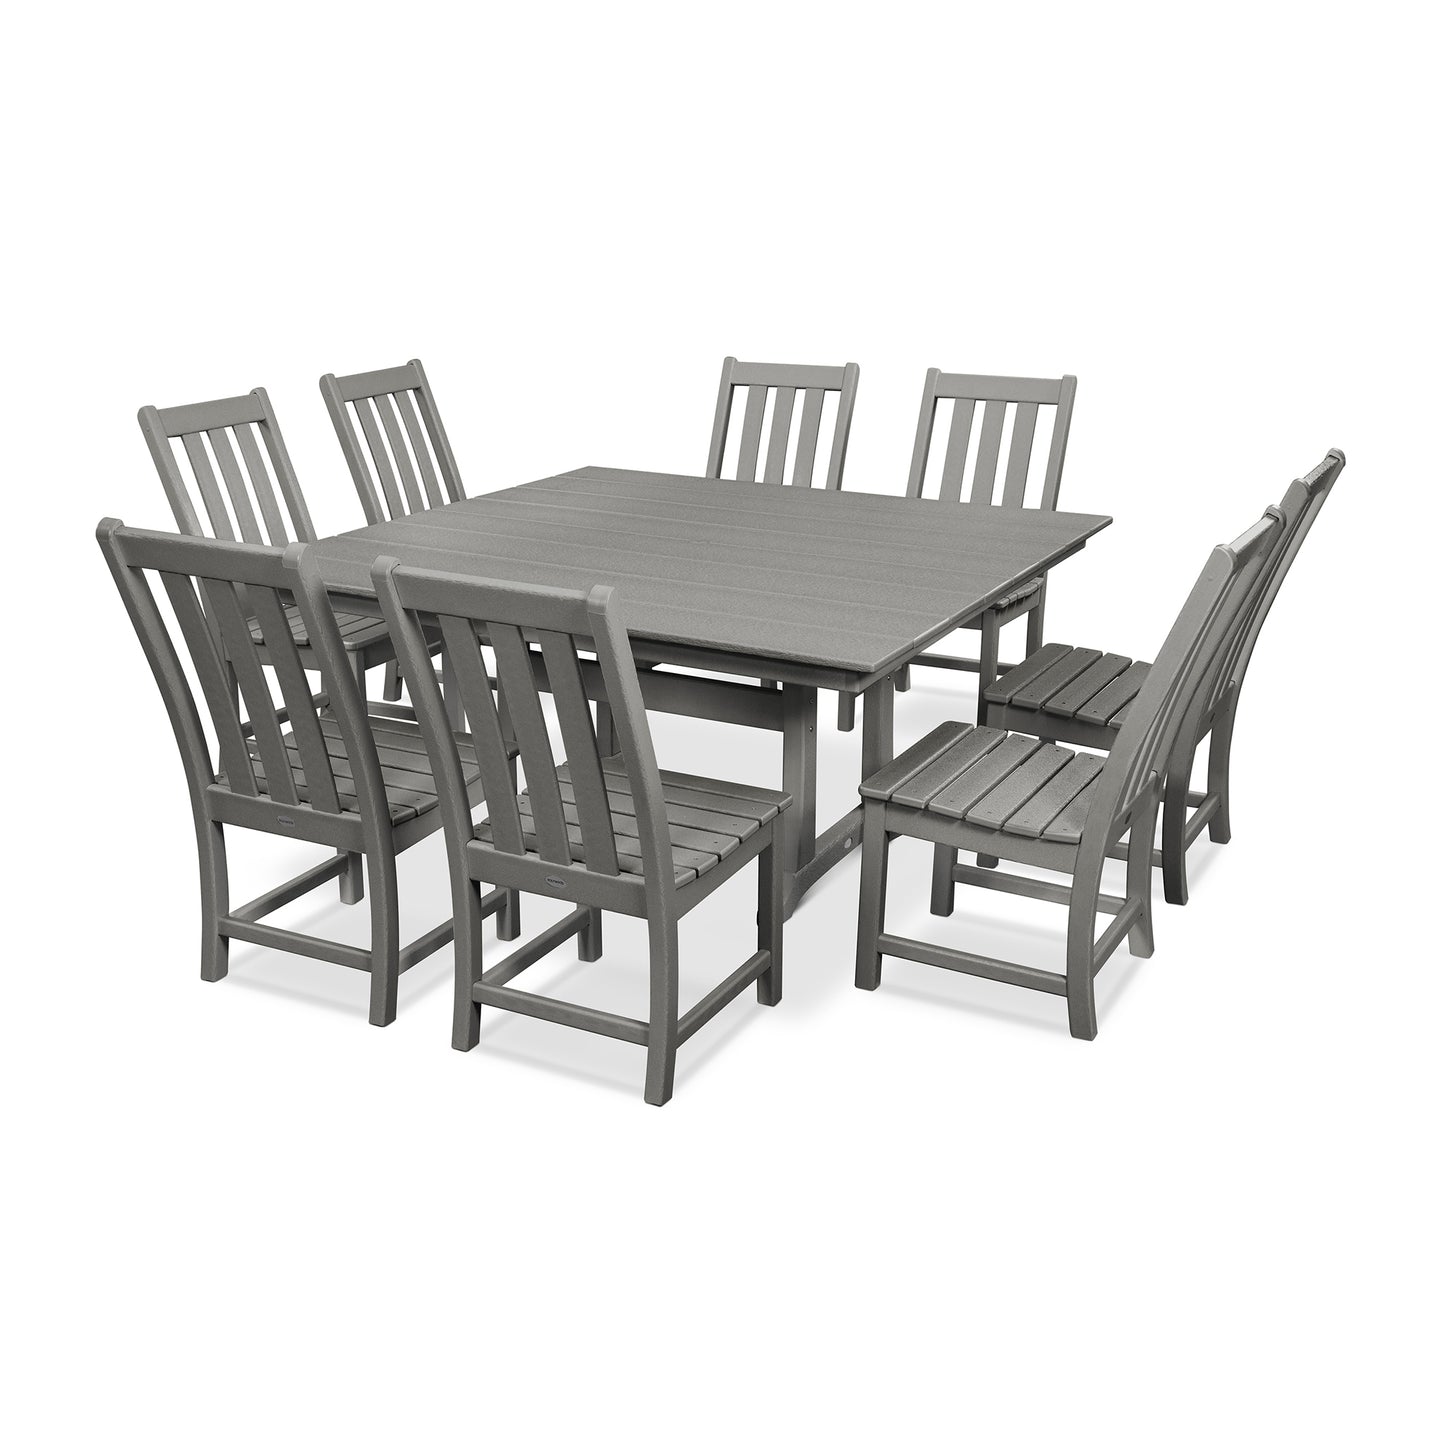 A modern POLYWOOD® Vineyard 9-Piece Farmhouse Trestle outdoor dining set featuring a large rectangular table and six chairs, all made of gray synthetic materials designed to mimic wood slats. The set is arranged on a plain